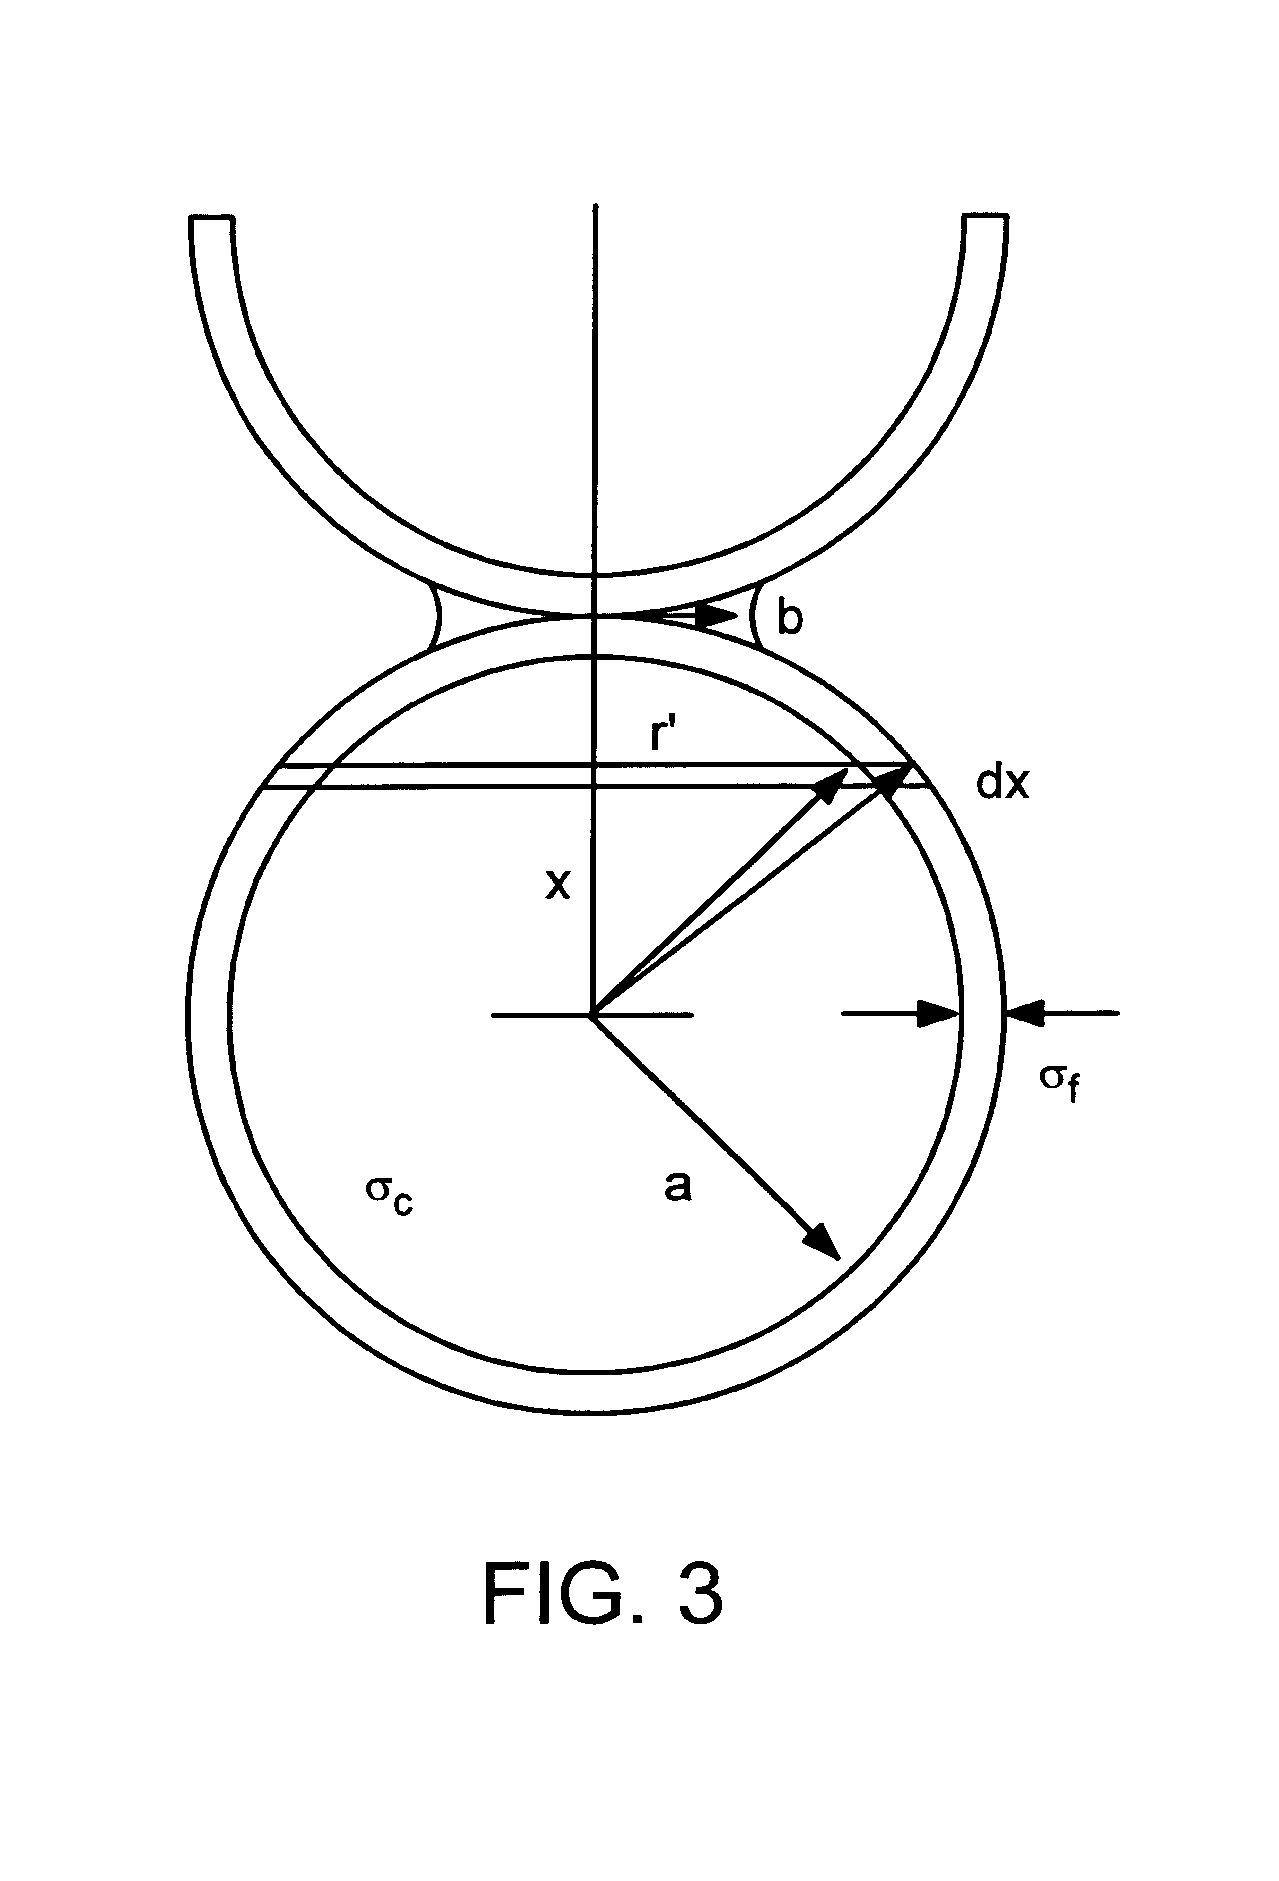 Coated electrode particles for composite electrodes and electrochemical cells